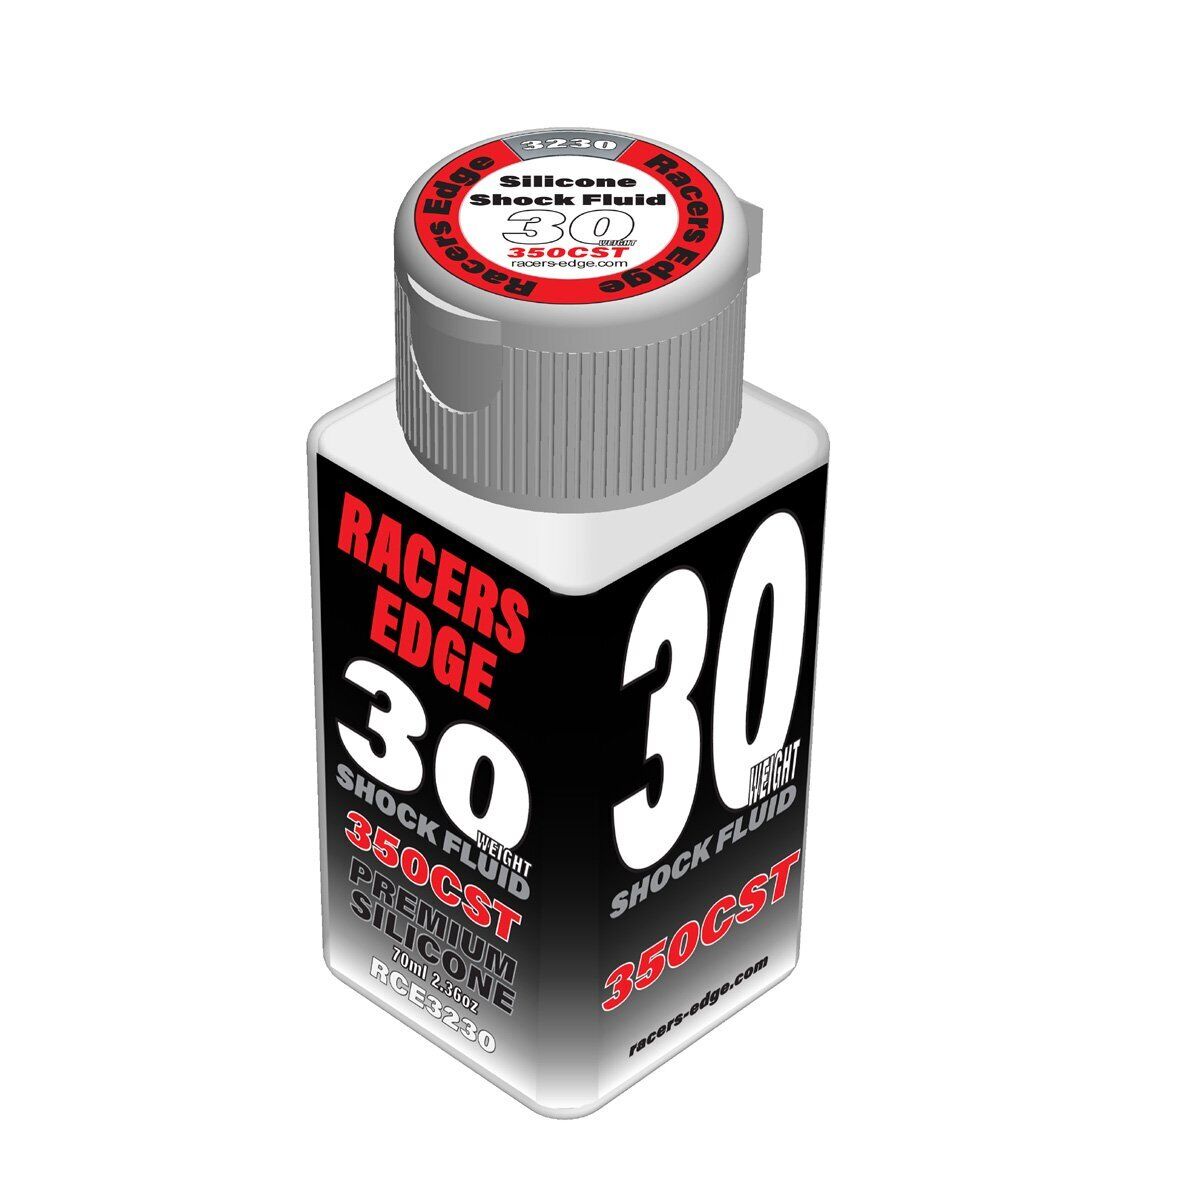 Racers Edge Rce3230 30 Weight 350cst 70ml 2.36oz Pure Silicone Shock Oil